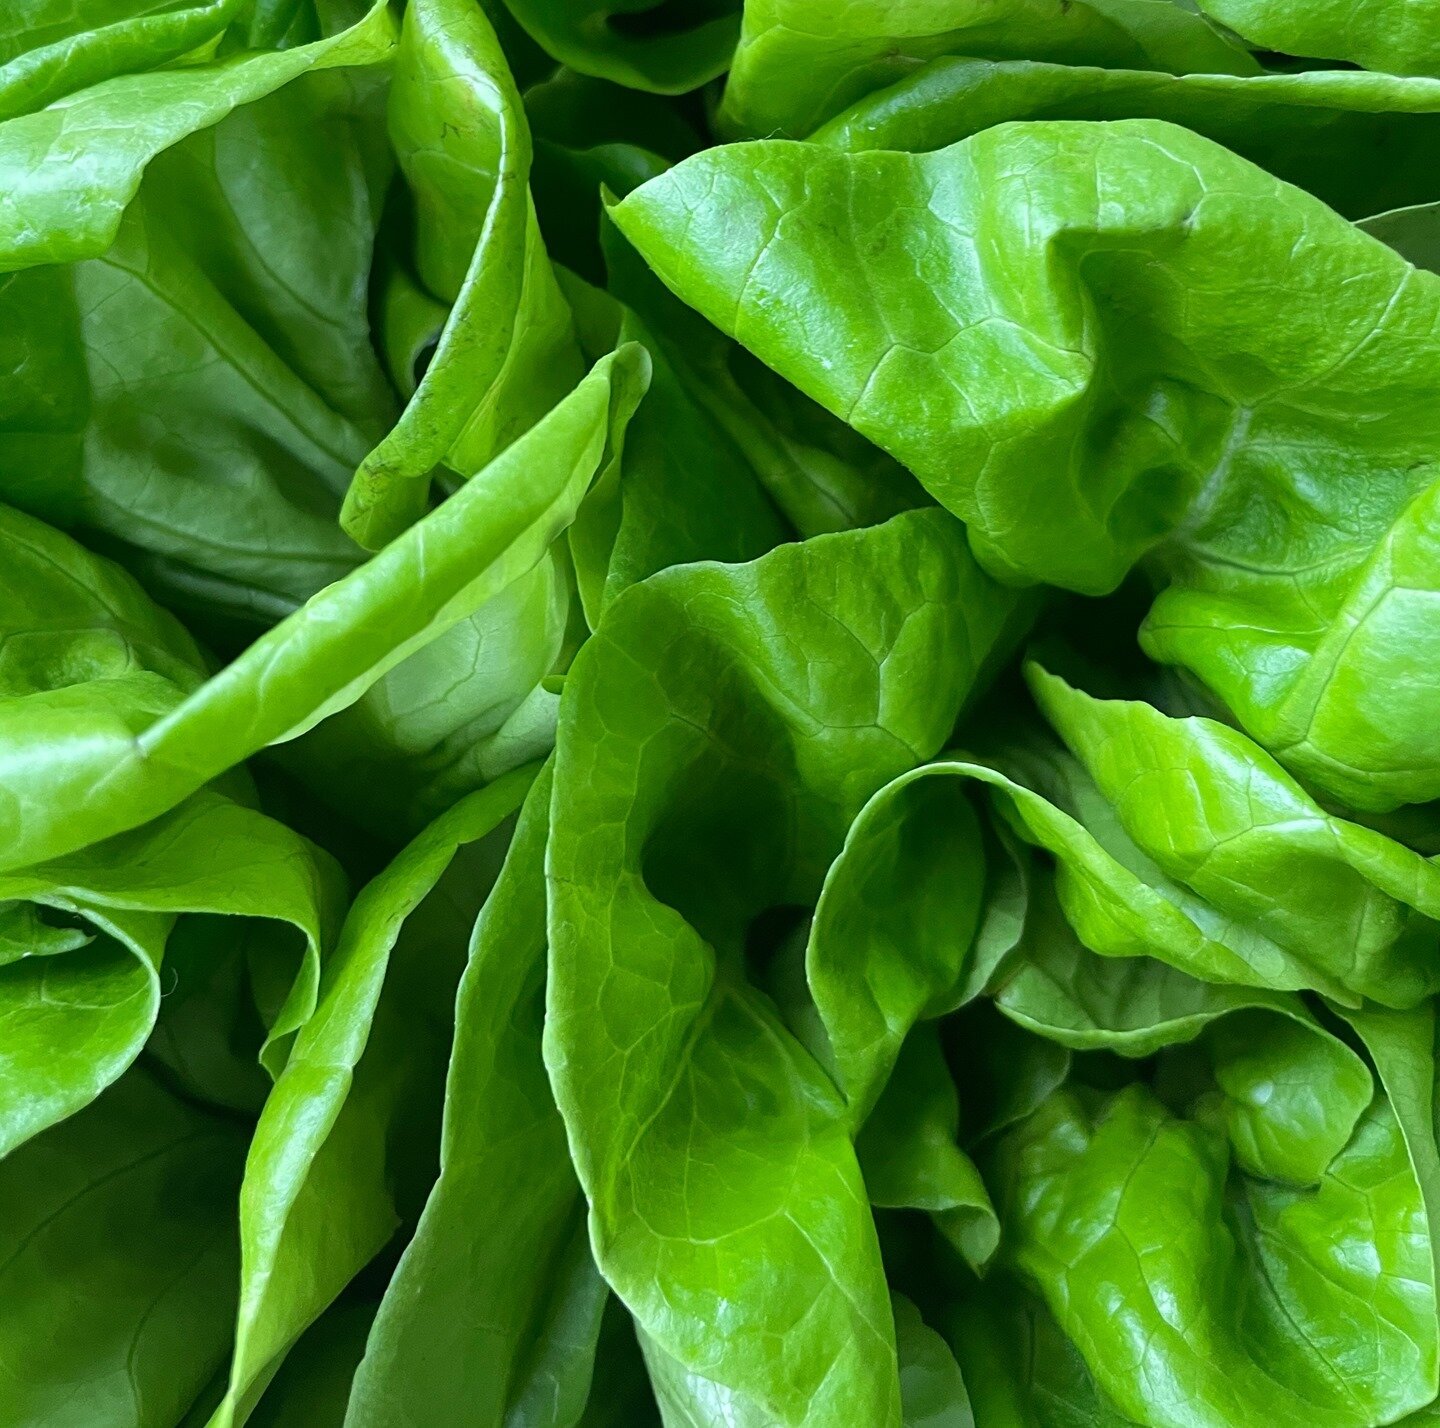 Rounding out this green week with a favorite of ours! This butterhead lettuce is equal parts beautiful &amp; tasty!